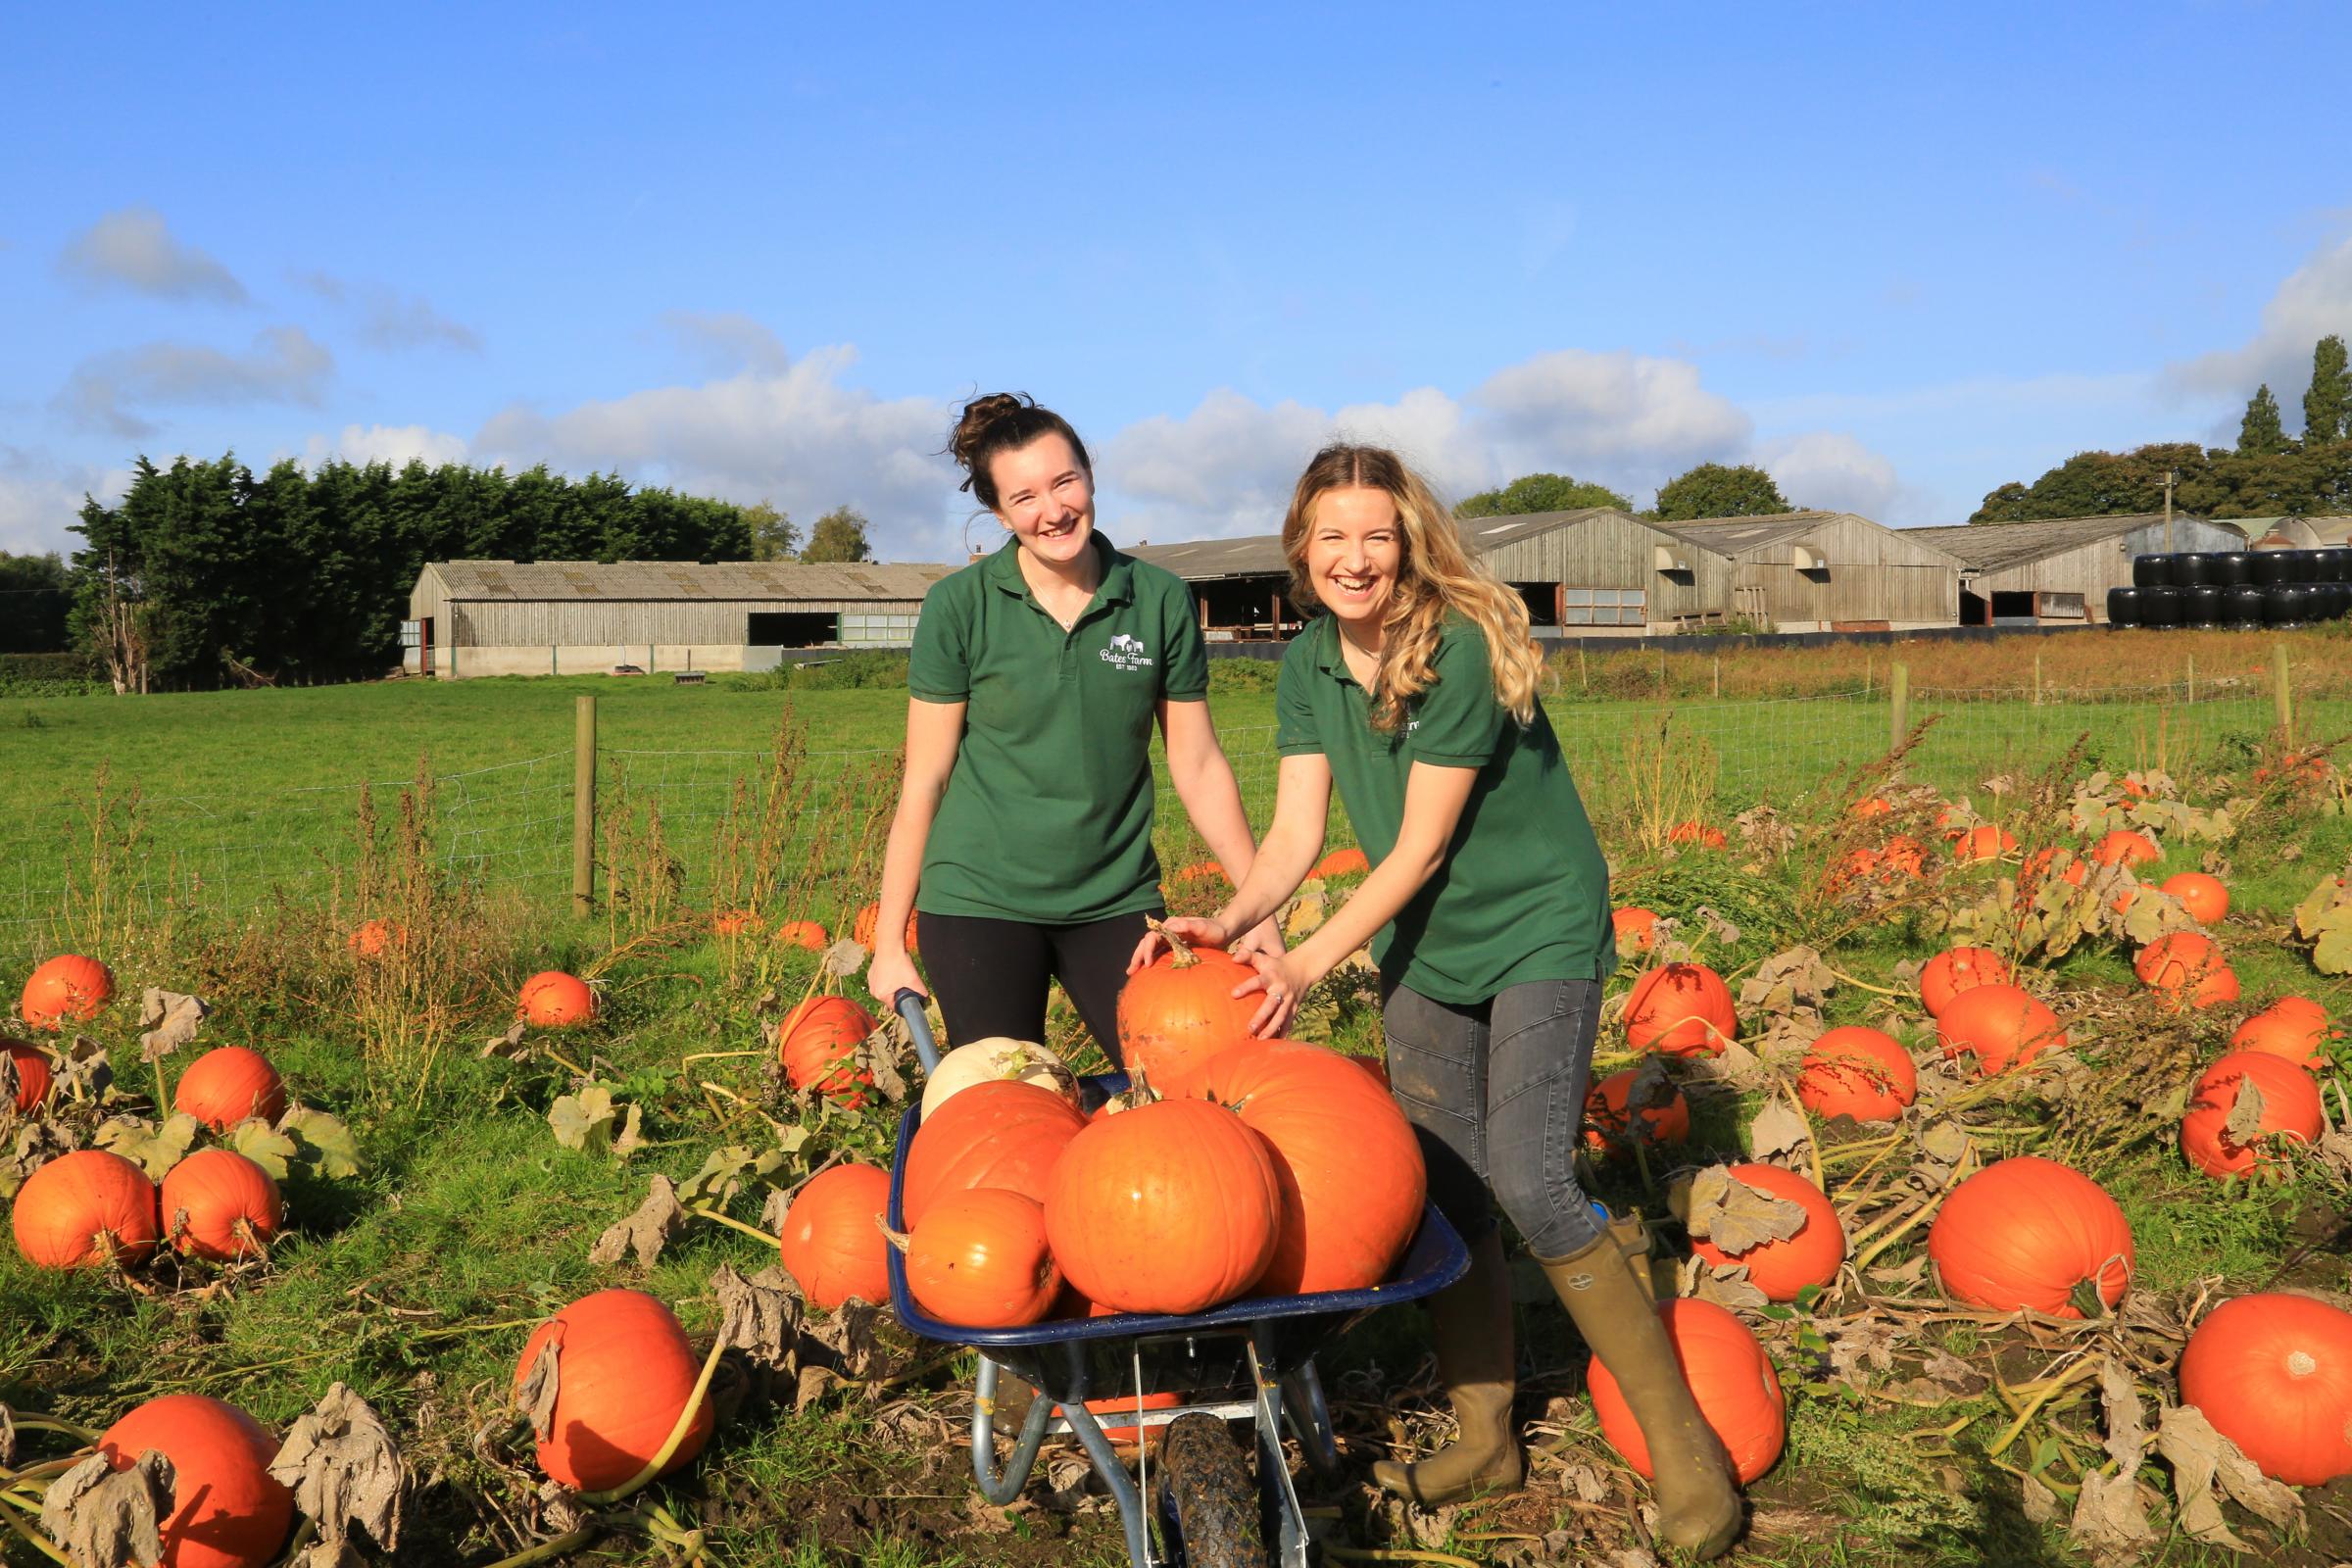 The sisters cannot wait for pumpkin picking season to return - Pictures: Brian Touhey Photography